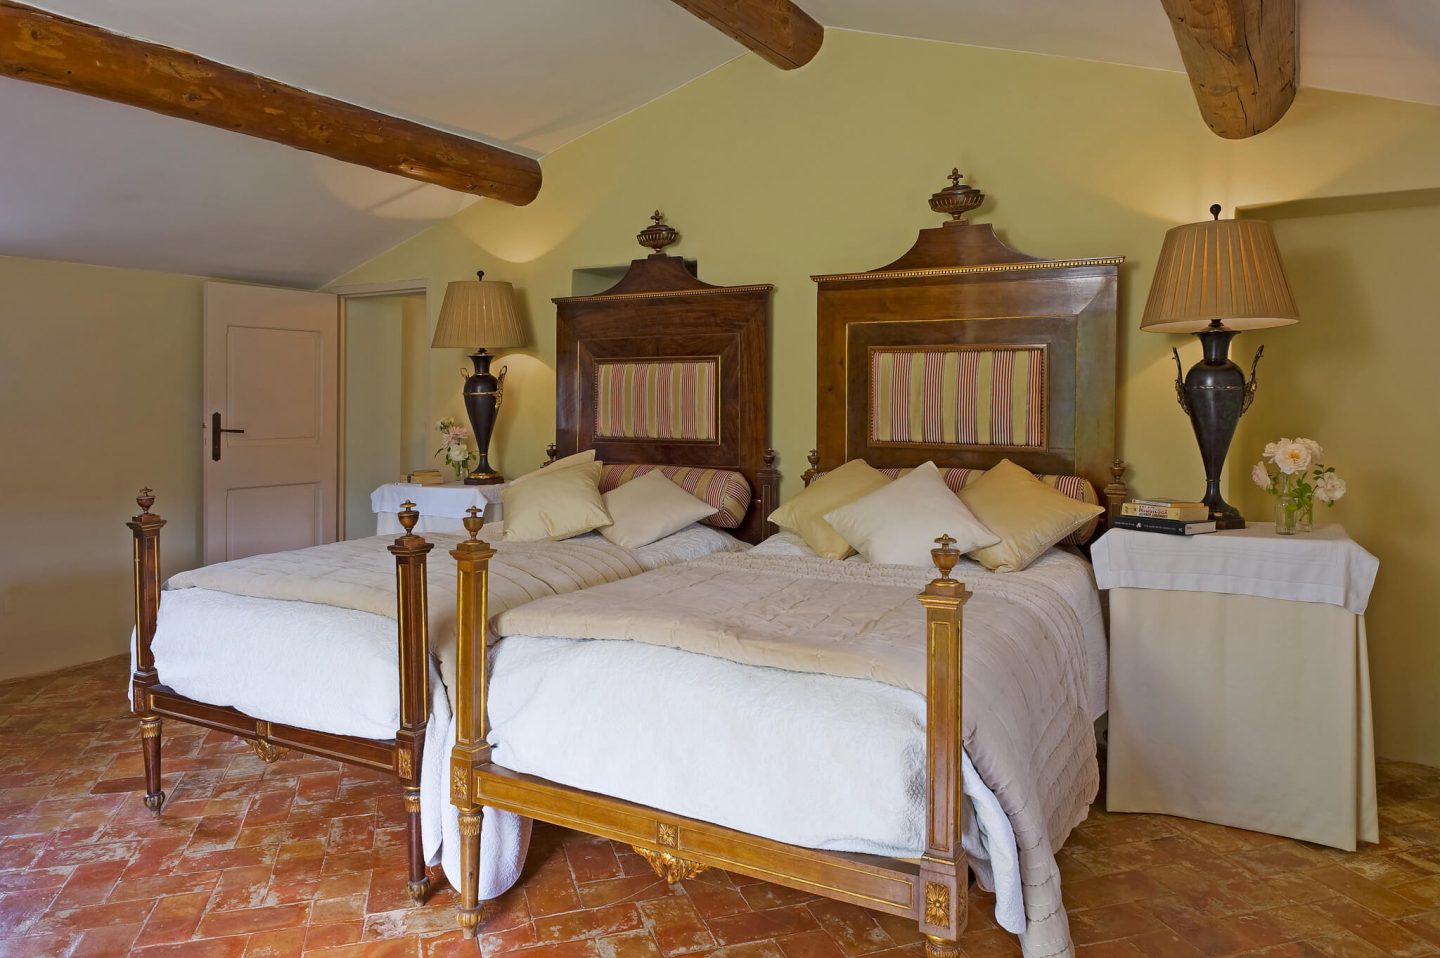 Beautiful French country house in Provence. Come tour Provence Villa St-Saturnin: Timeless & Tranquil Design...the interiors have authentic and classic French style and this luxury vacation rental can be booked through Haven In. #frenchcountry #houseinfrance #bastide #frenchfarmhouse #housetour #provence #provencal #havenin #europeancountry